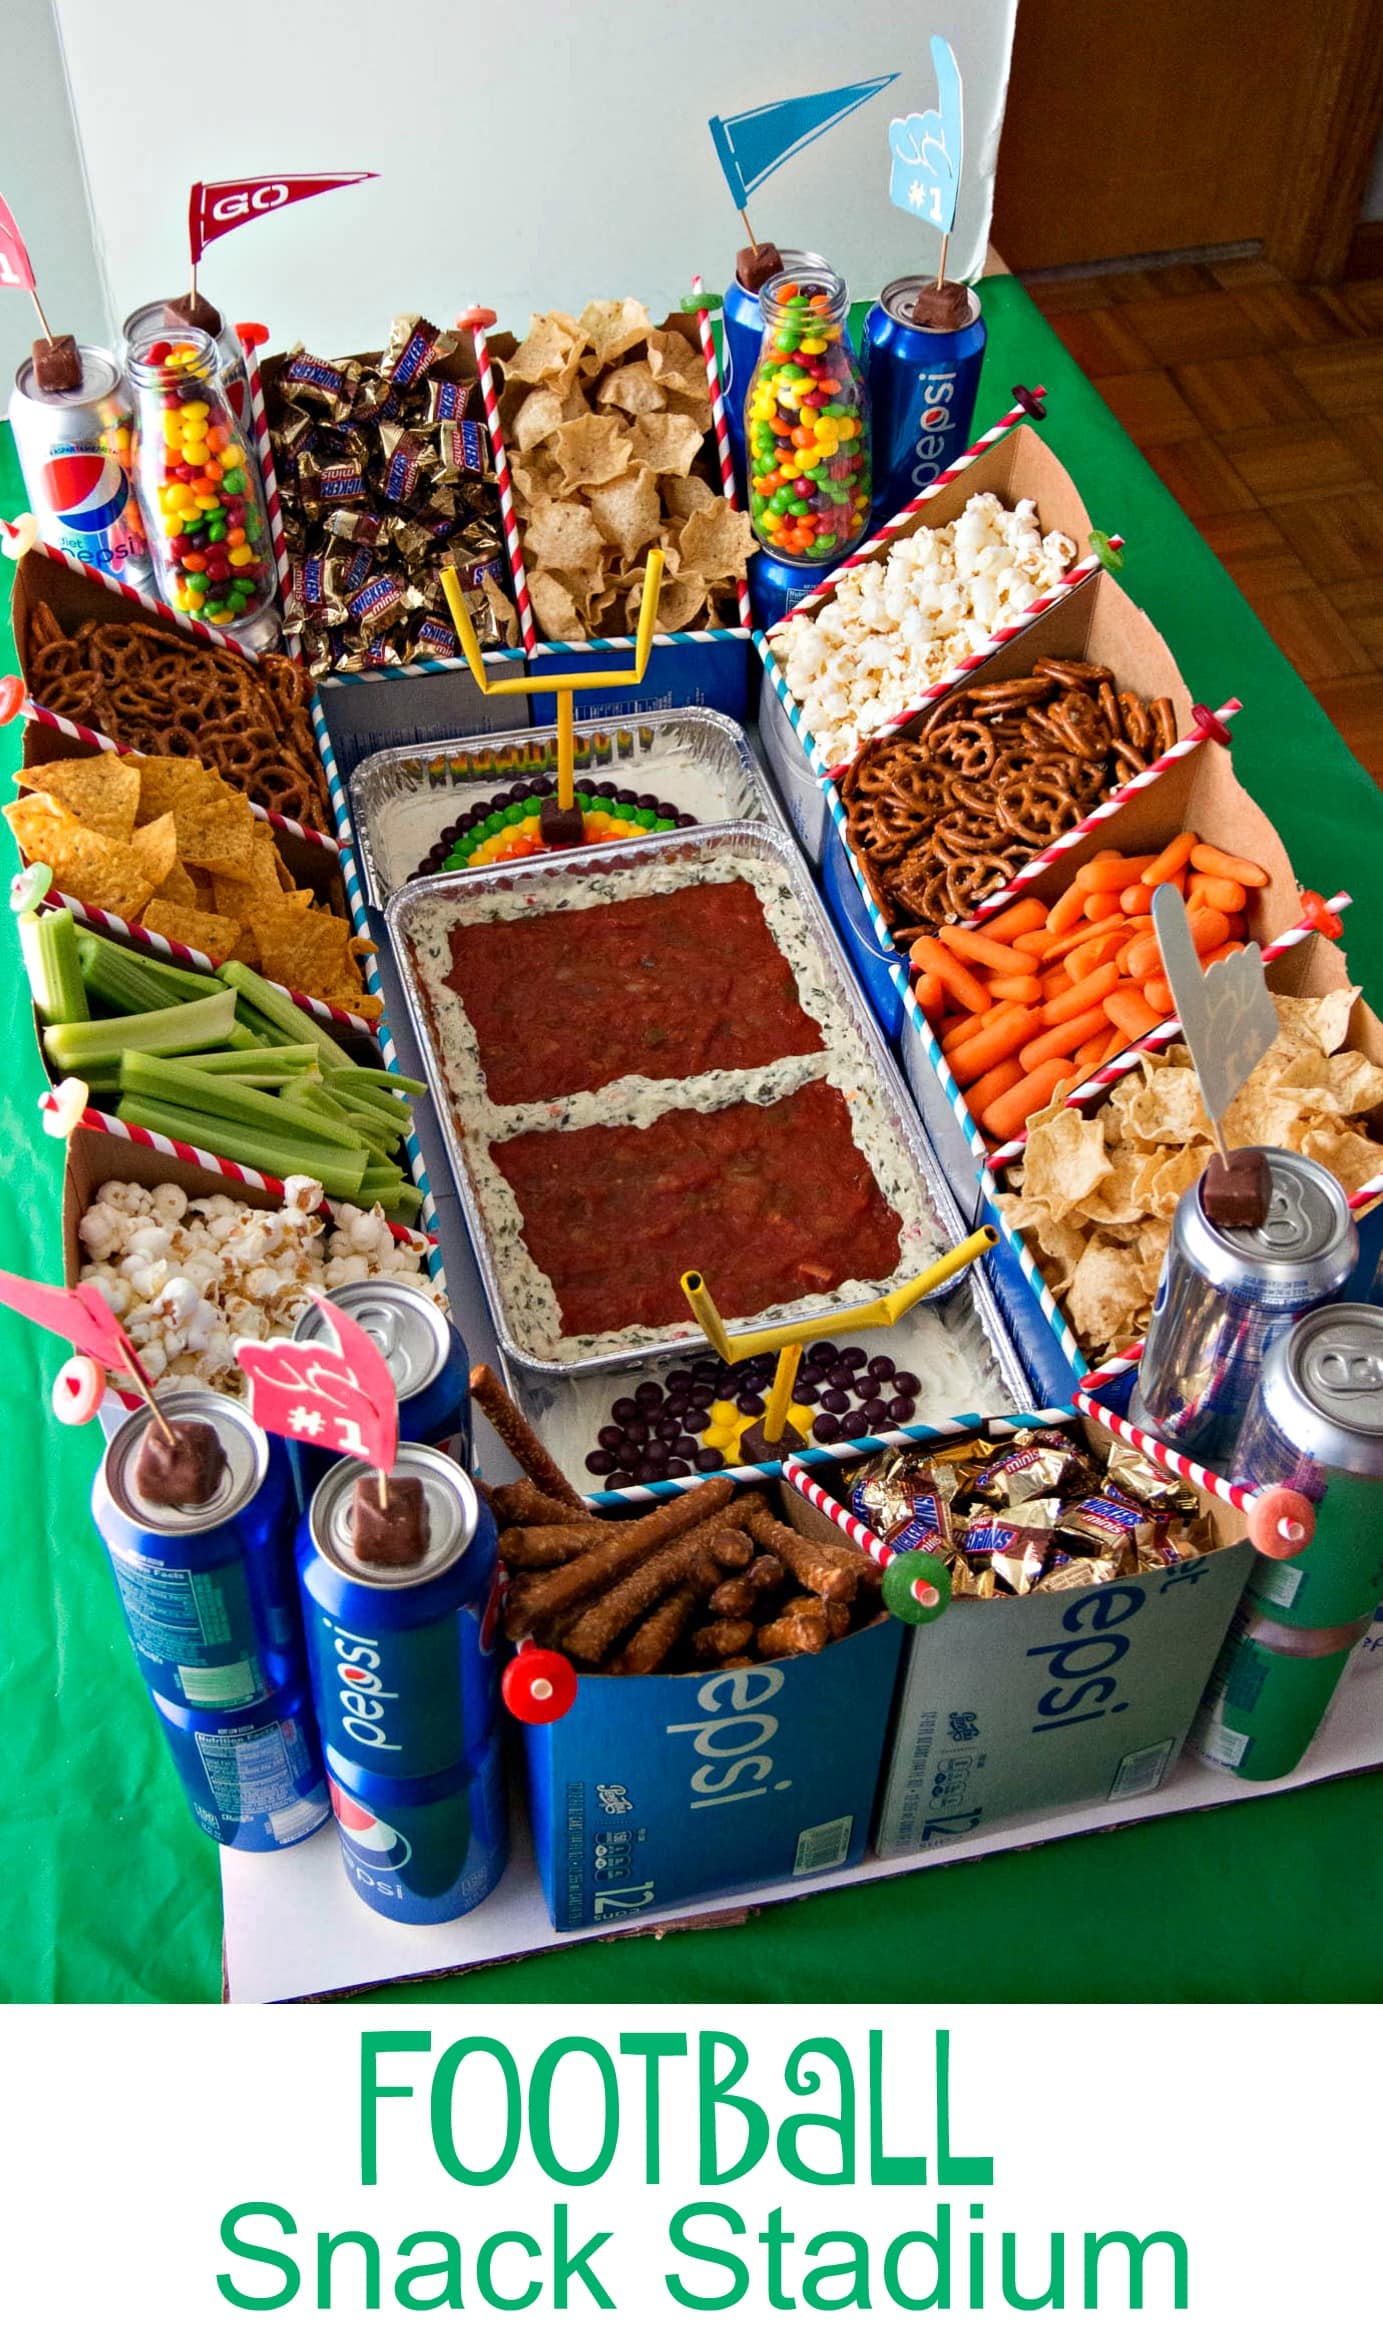 Ultimate in sports party entertaining - check out this Football Snack Stadium 